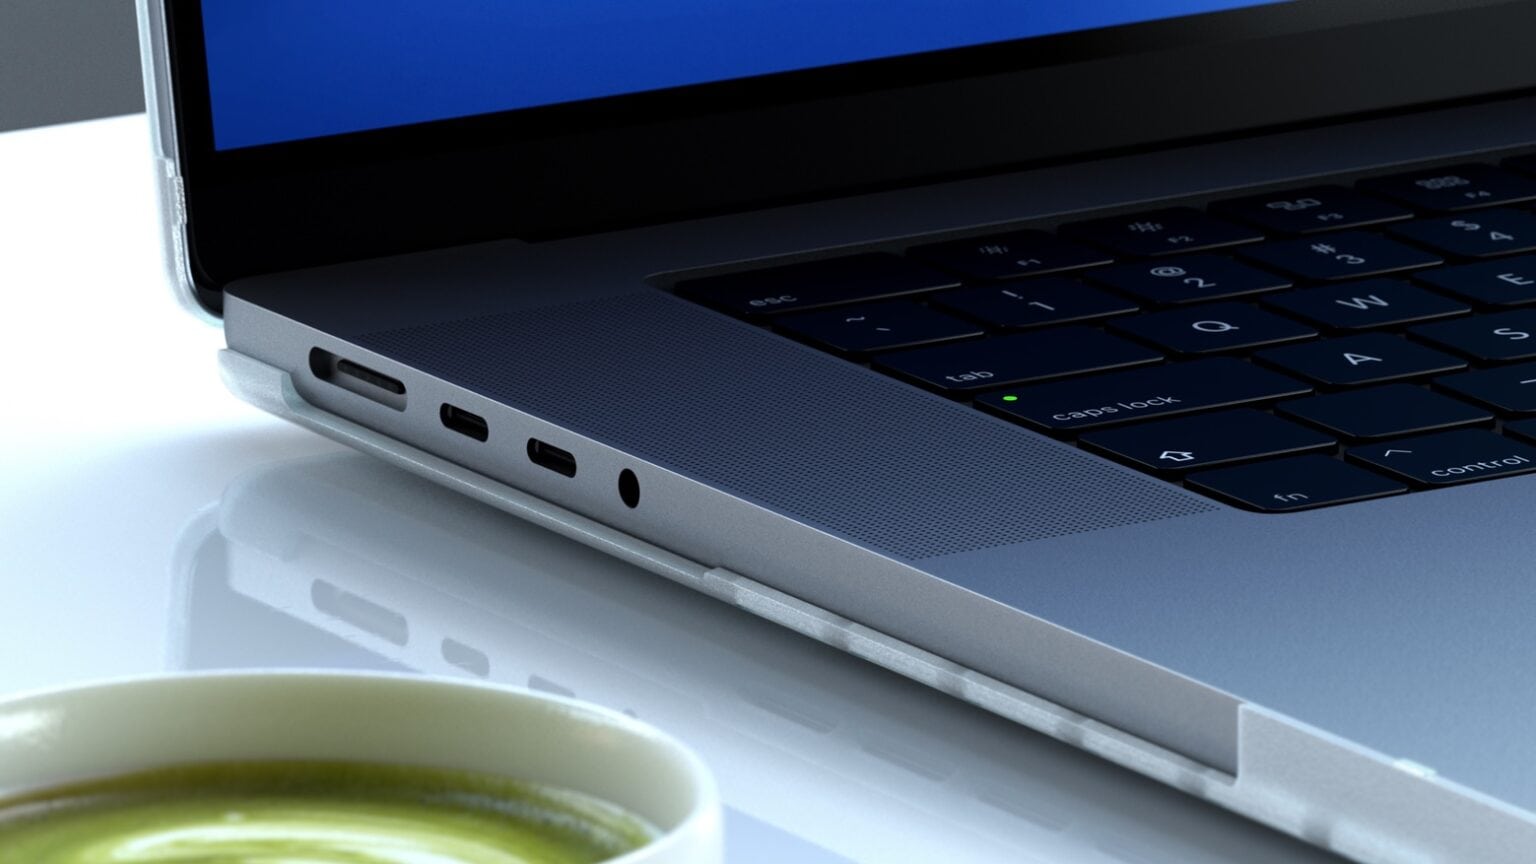 Satechi's new hardcase wraps MacBook Pro in form-fitting protection